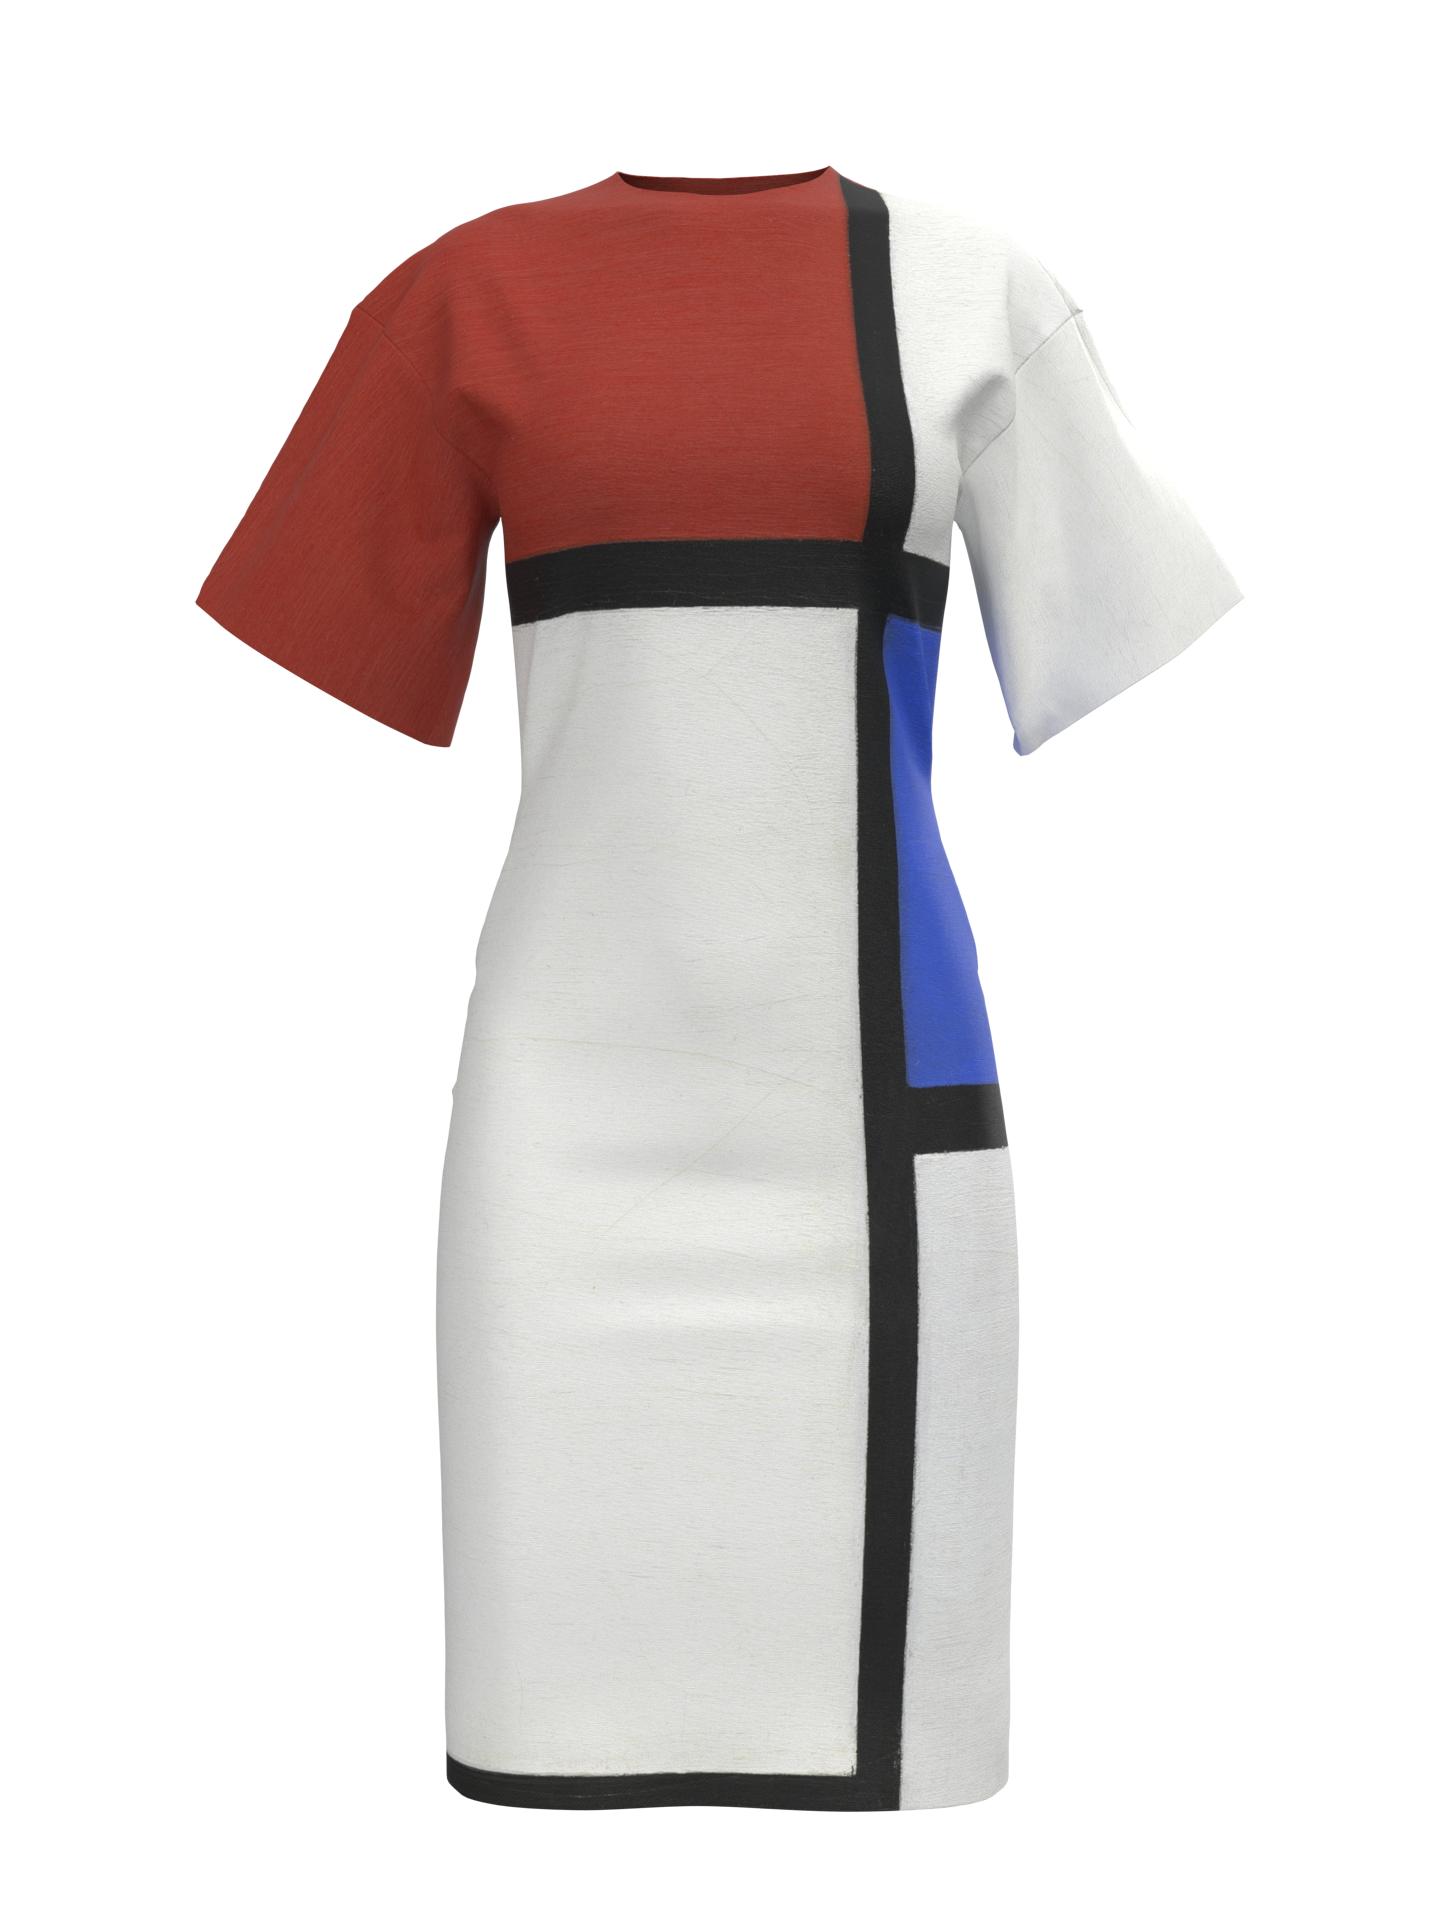 Dress-Composition No. II with Red and Blue by DRESSX PIET MONDRIAN